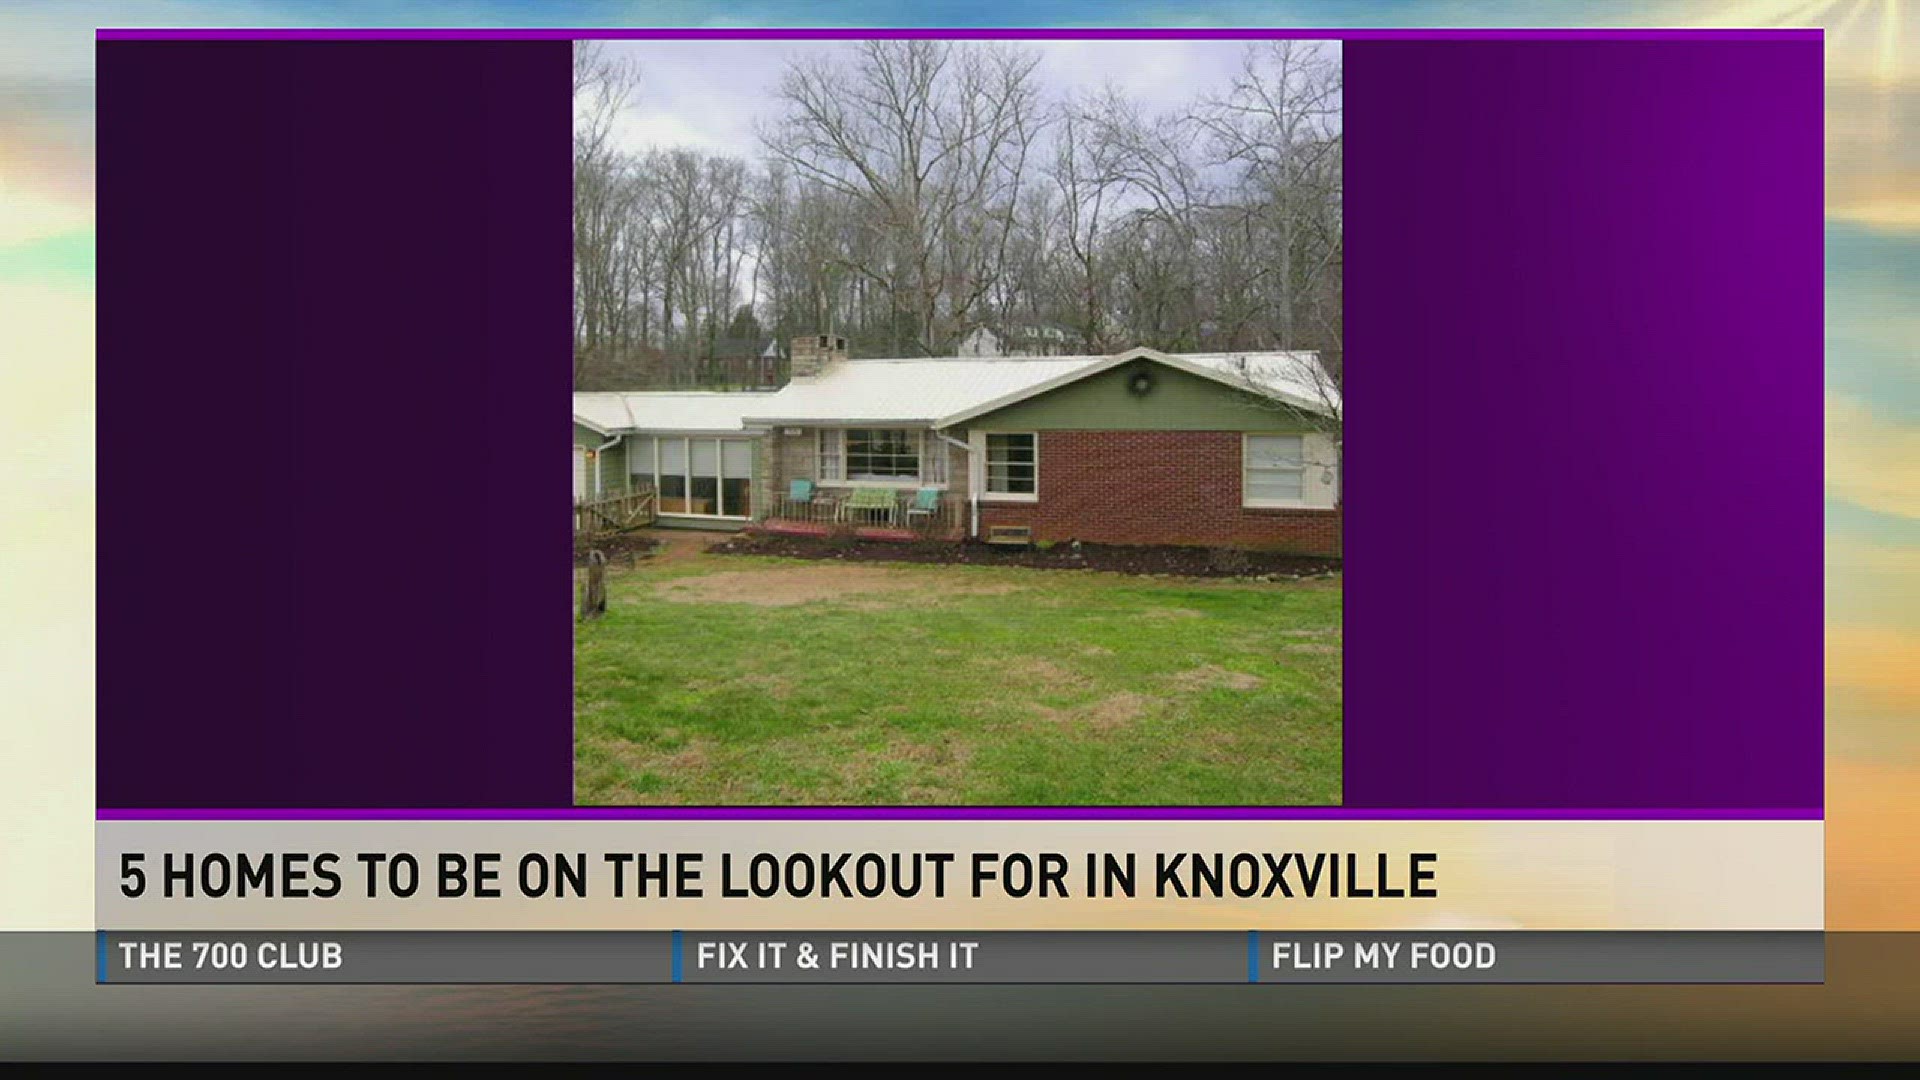 5 Homes to be on the Lookout for in Knoxville